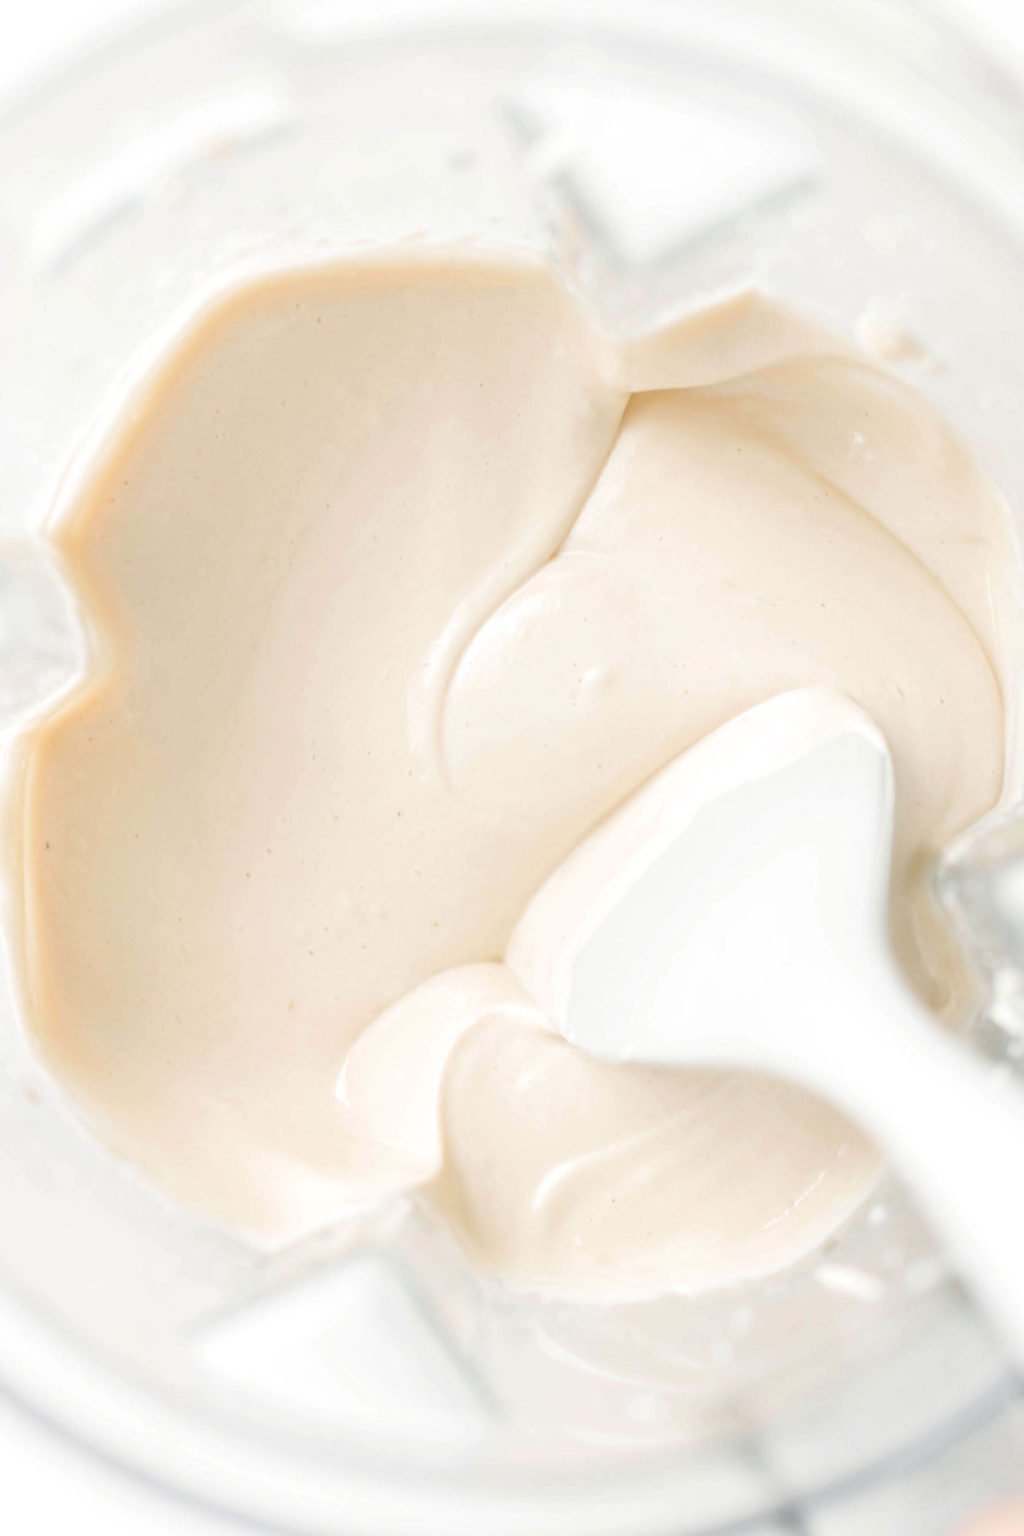 A creamy, blended tofu whipped cream is being stirred in the blender container with a spatula.